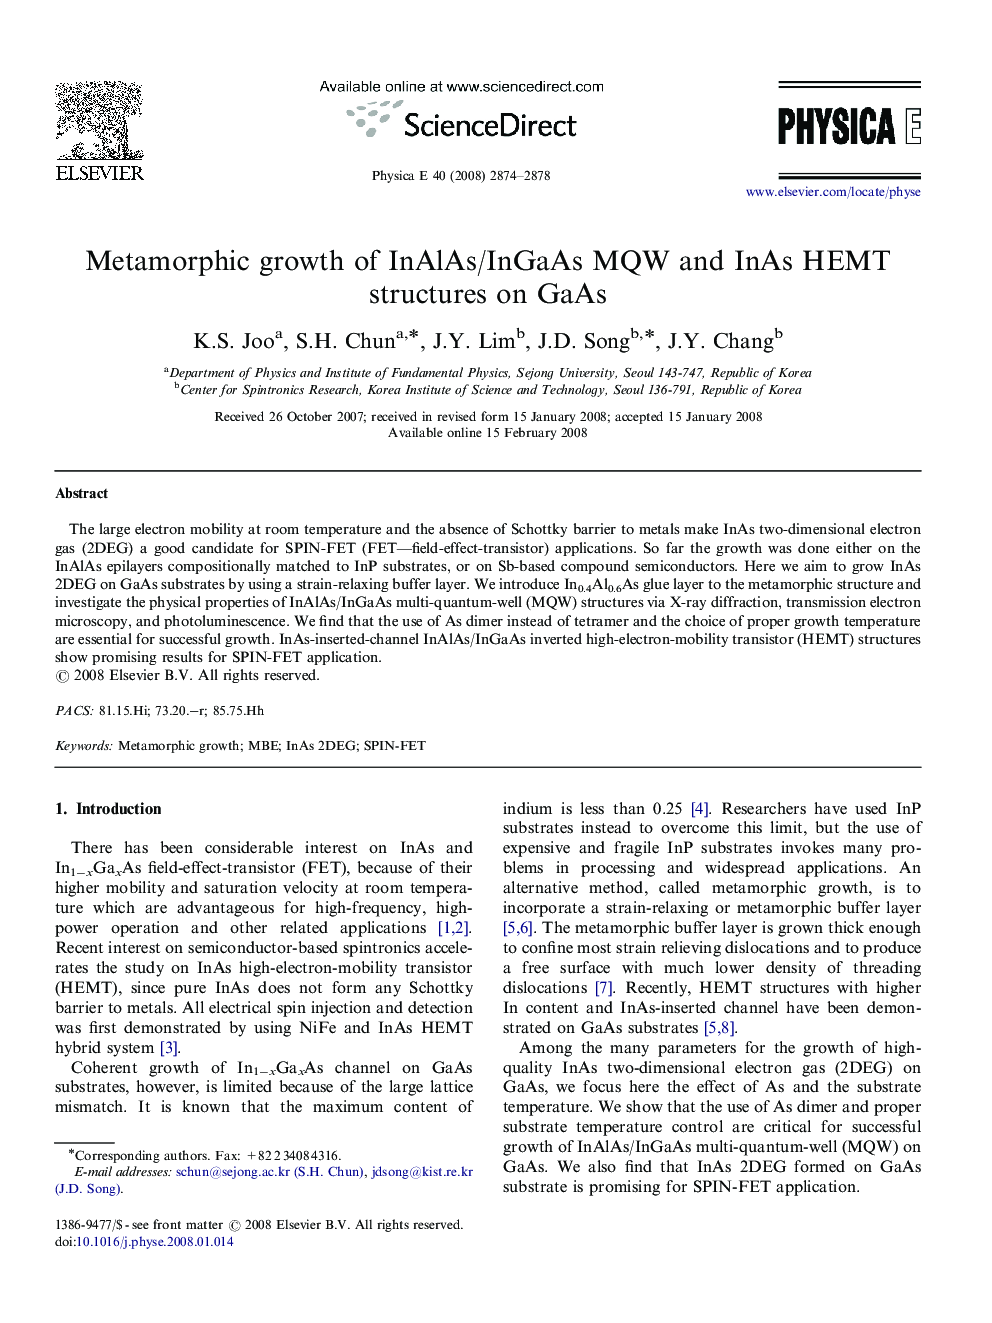 Metamorphic growth of InAlAs/InGaAs MQW and InAs HEMT structures on GaAs